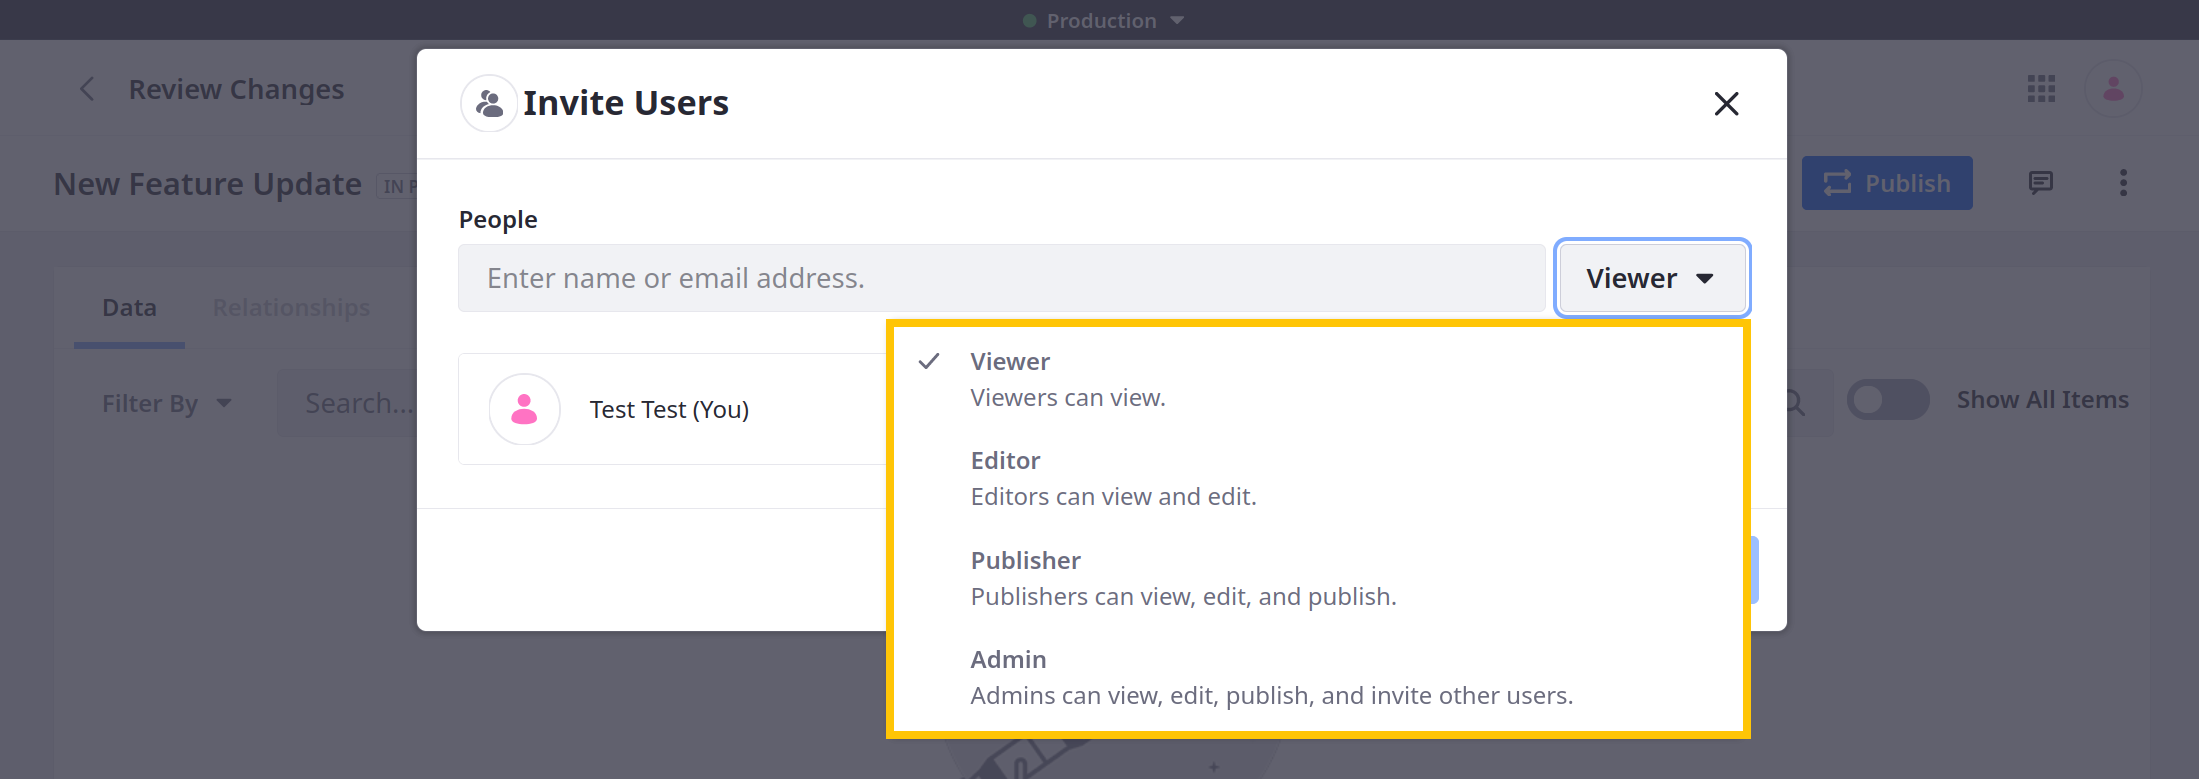 When inviting users to a publication, you can assign a role scoped to that publication.